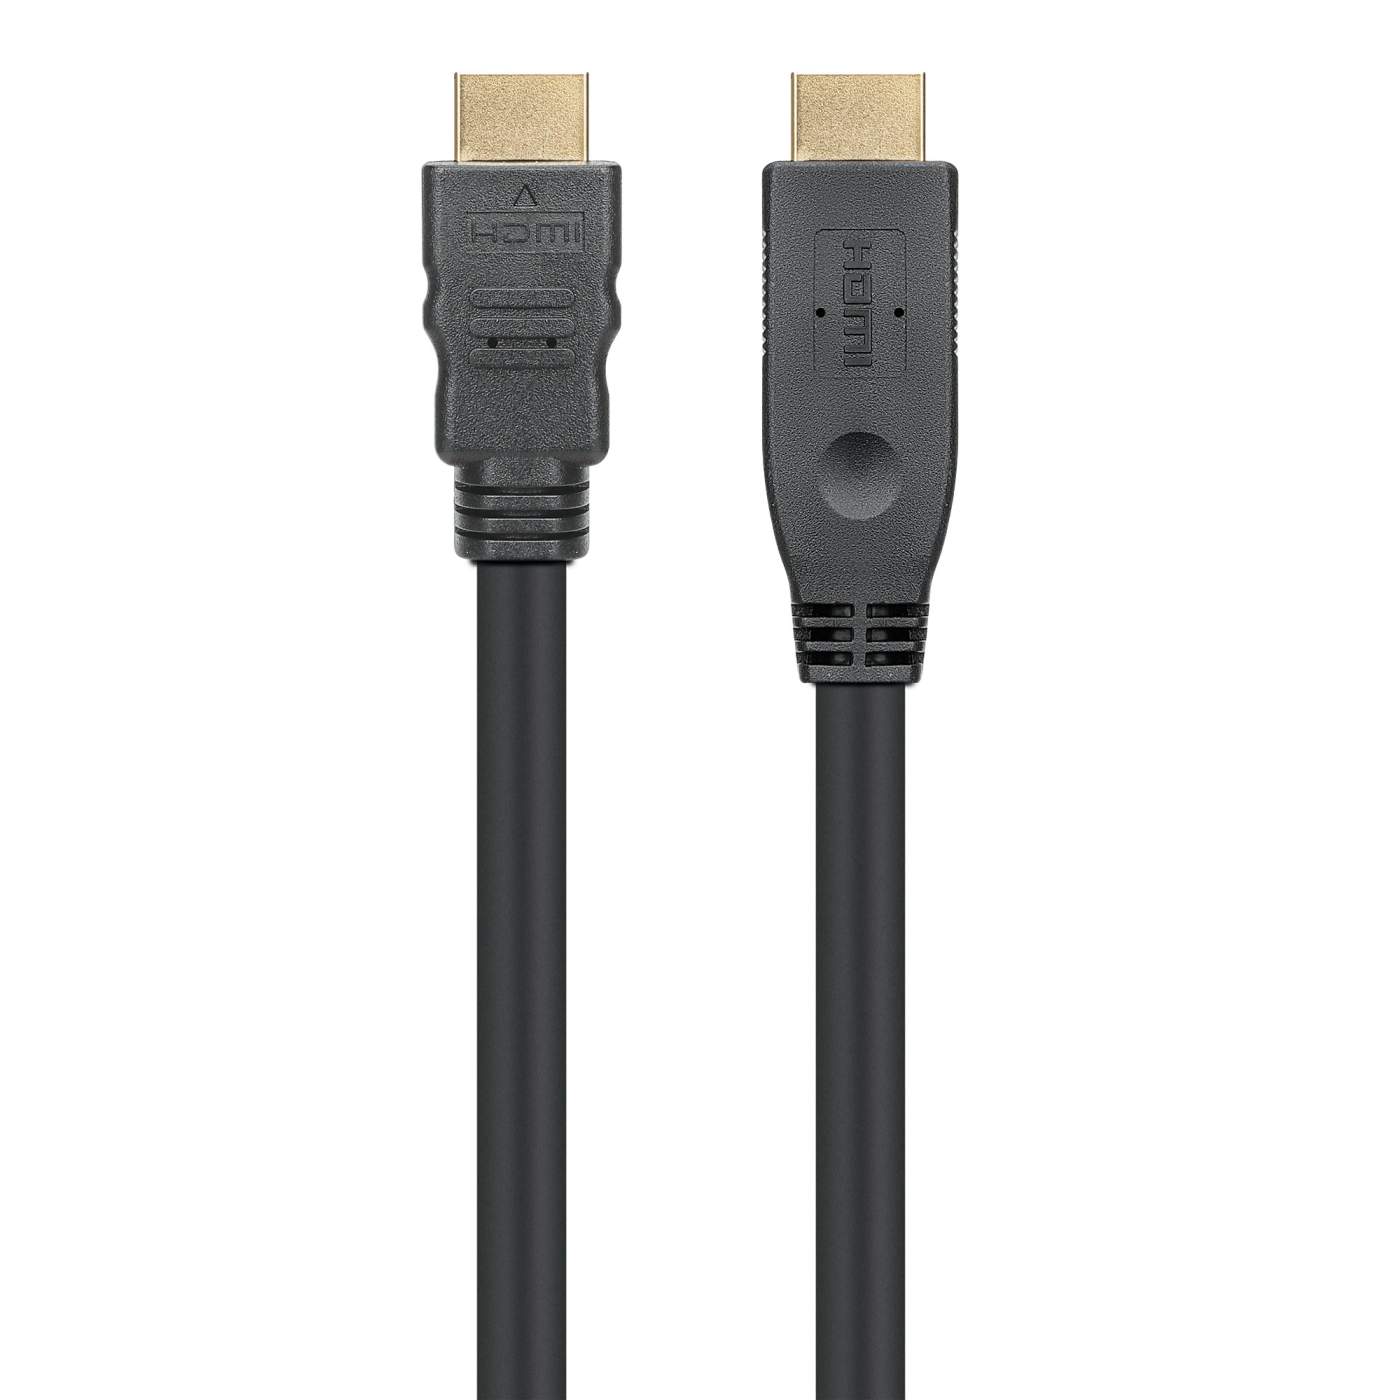 Open Box: Belkin HDMI to DVI Cable - limited lifetime warranty - 3 ft -  double s